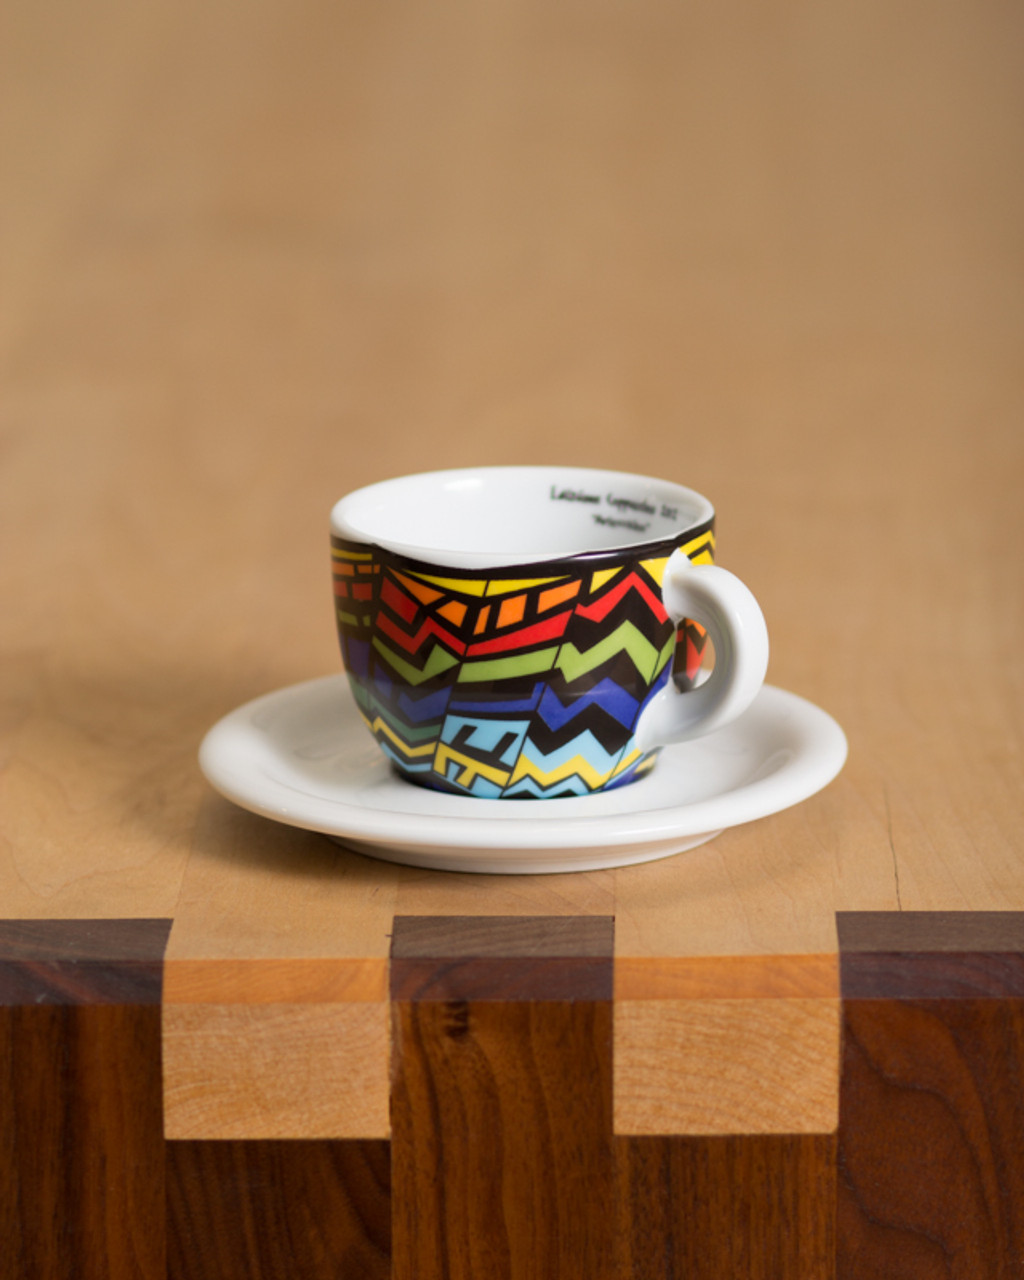 https://cdn11.bigcommerce.com/s-6h7ychjk4/images/stencil/1280x1280/products/7868/88091/ancap-arlecchino-cappuccino-cup-jagged-rainbow__23438.1597178737.jpg?c=1&imbypass=on